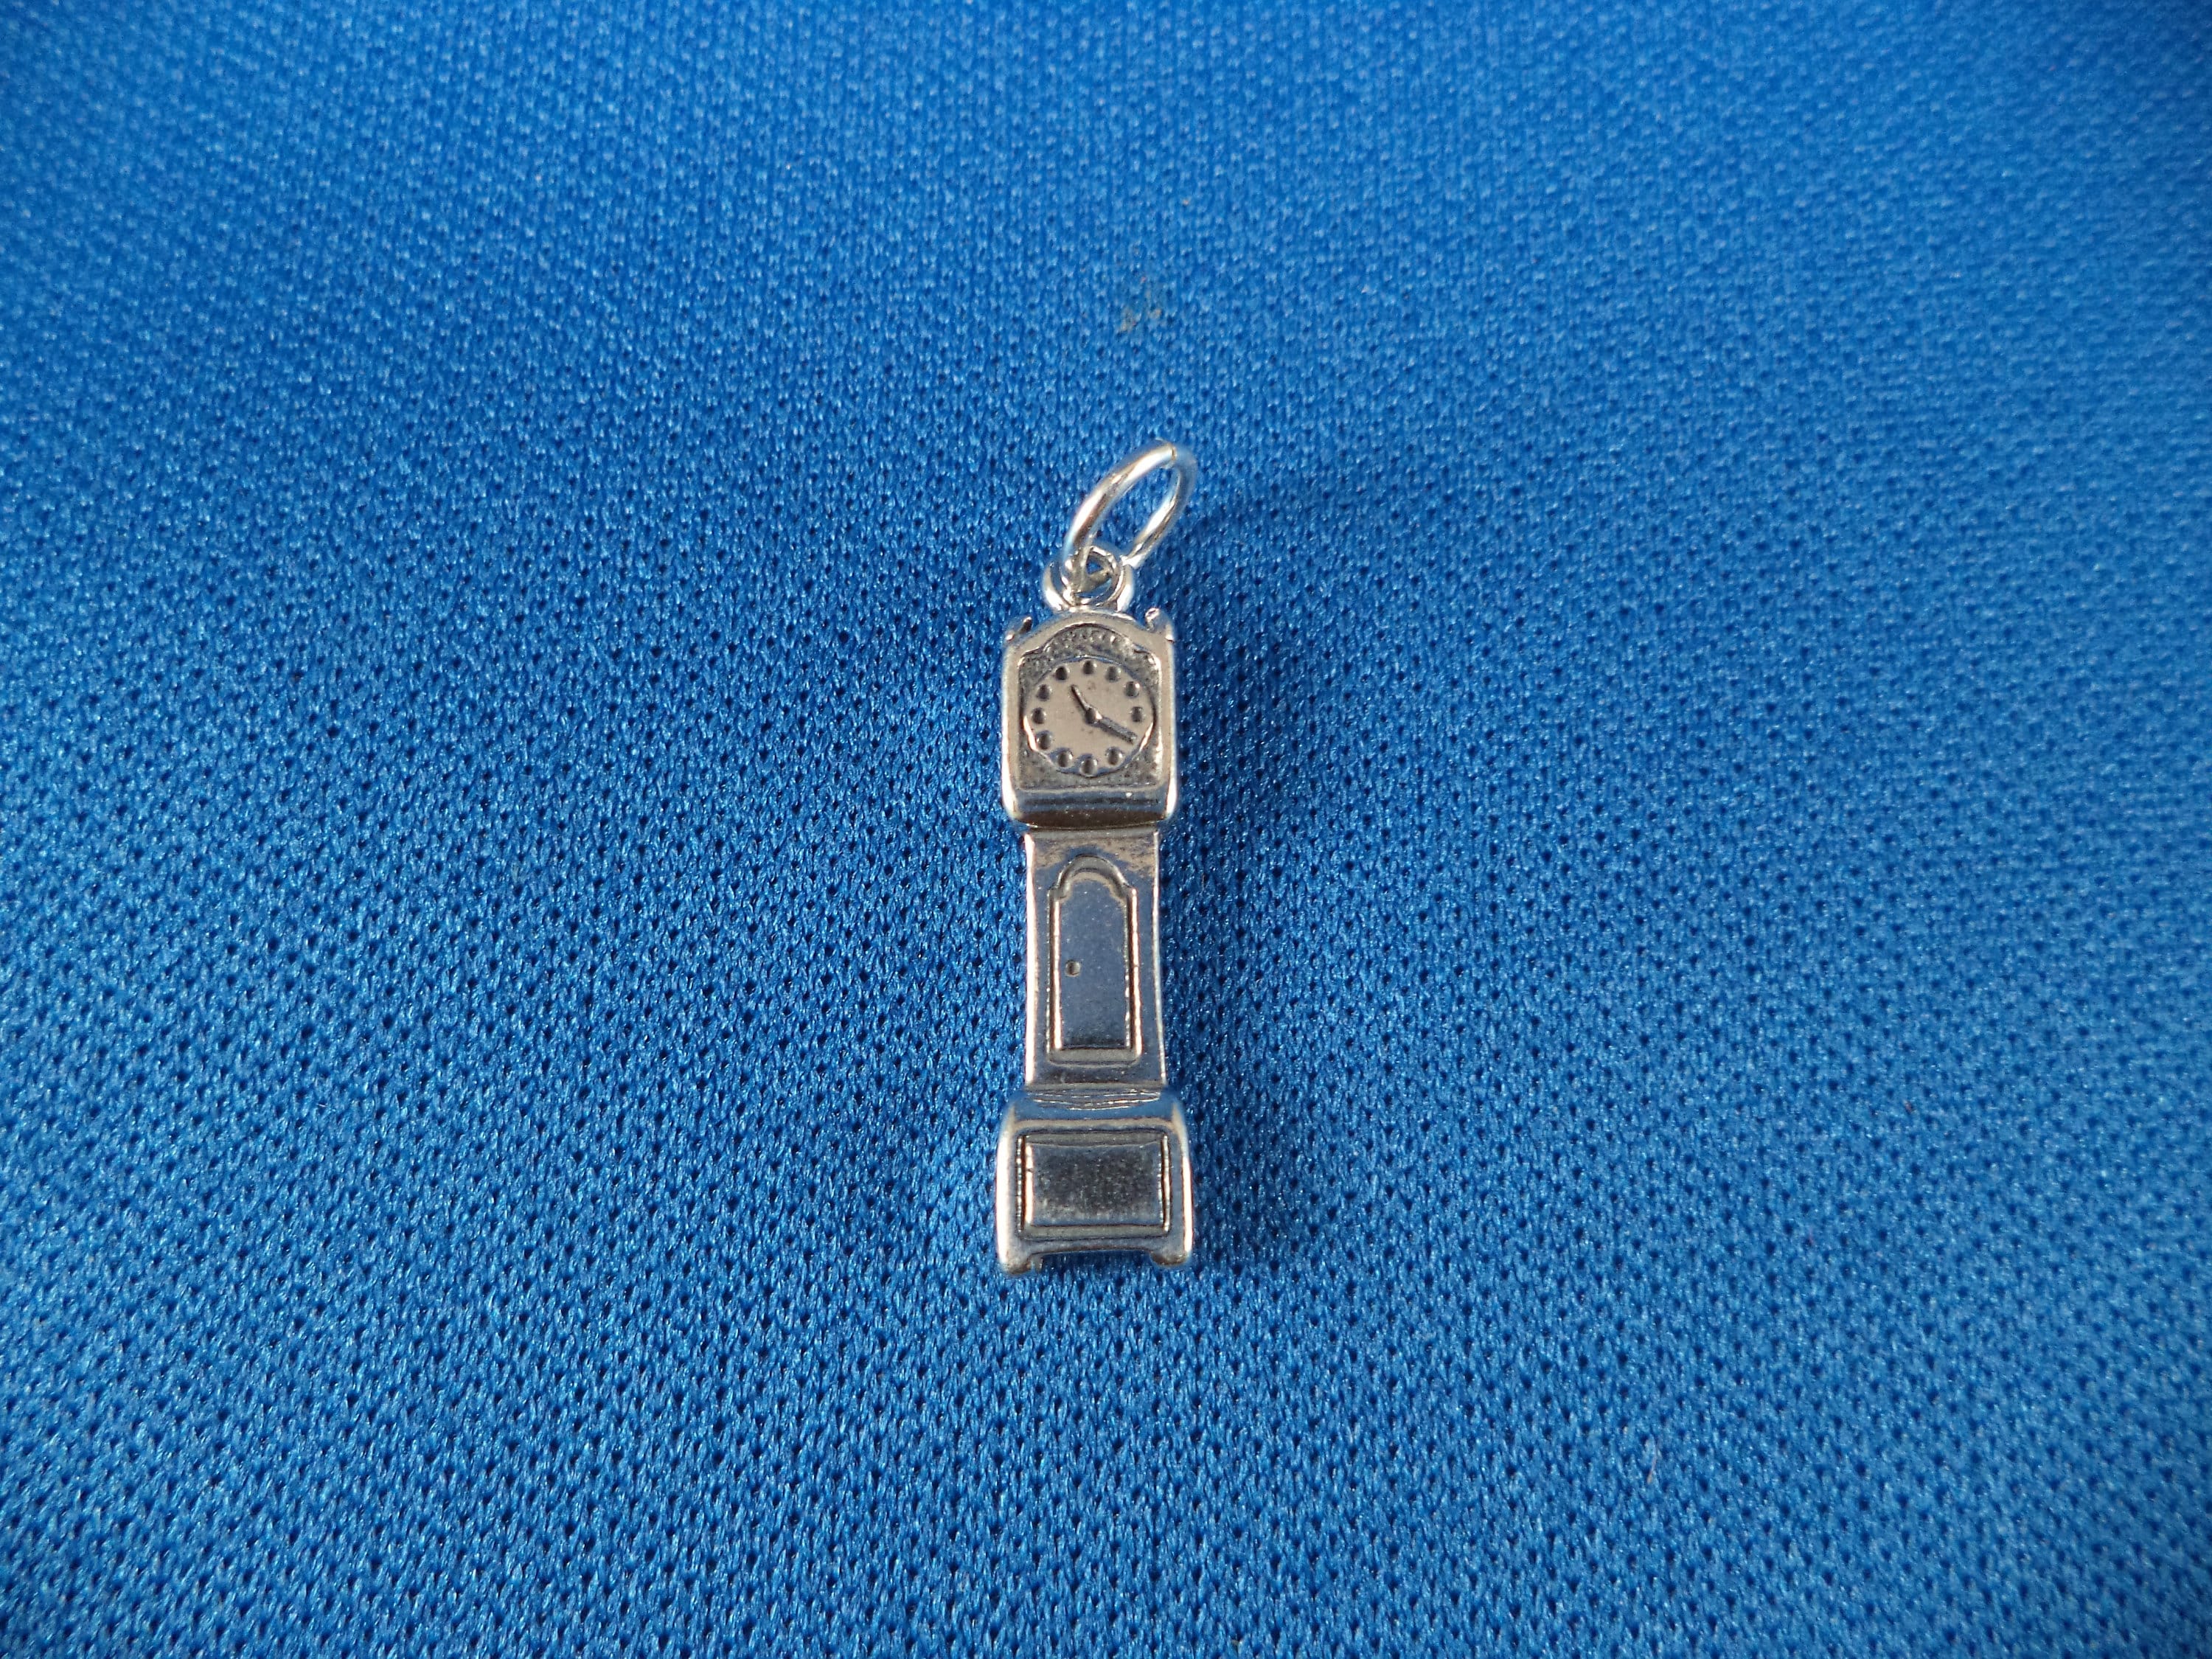 .925 Sterling Silver 3-D GRANDFATHER CLOCK CHARM Pendant Furnishing NEW 925 HM31 